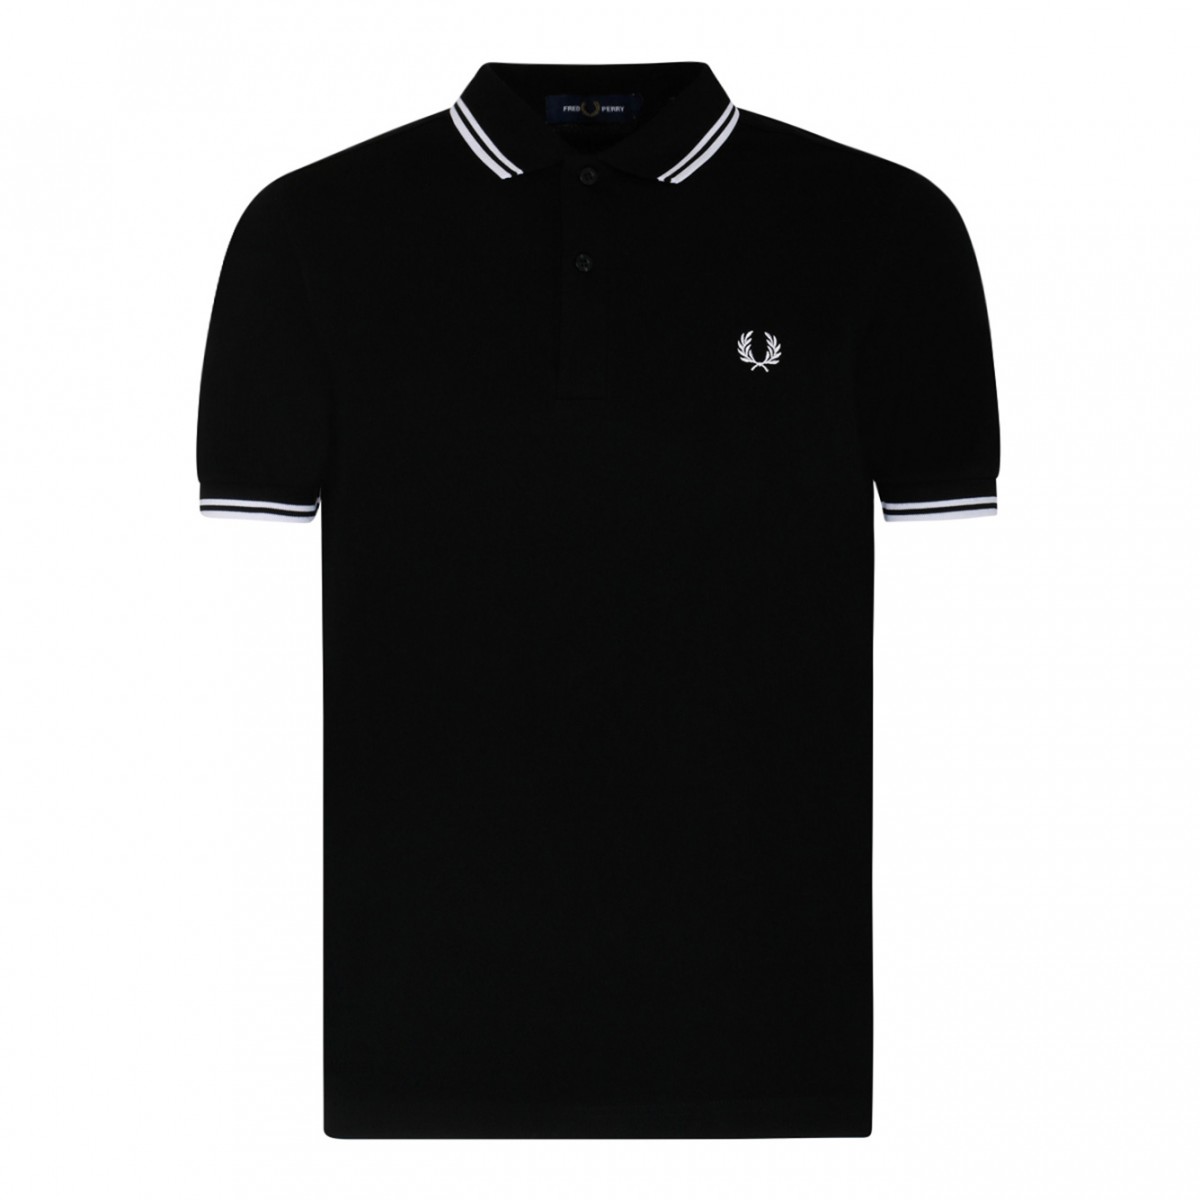 Fred Perry Black Cotton Polo Shirt.